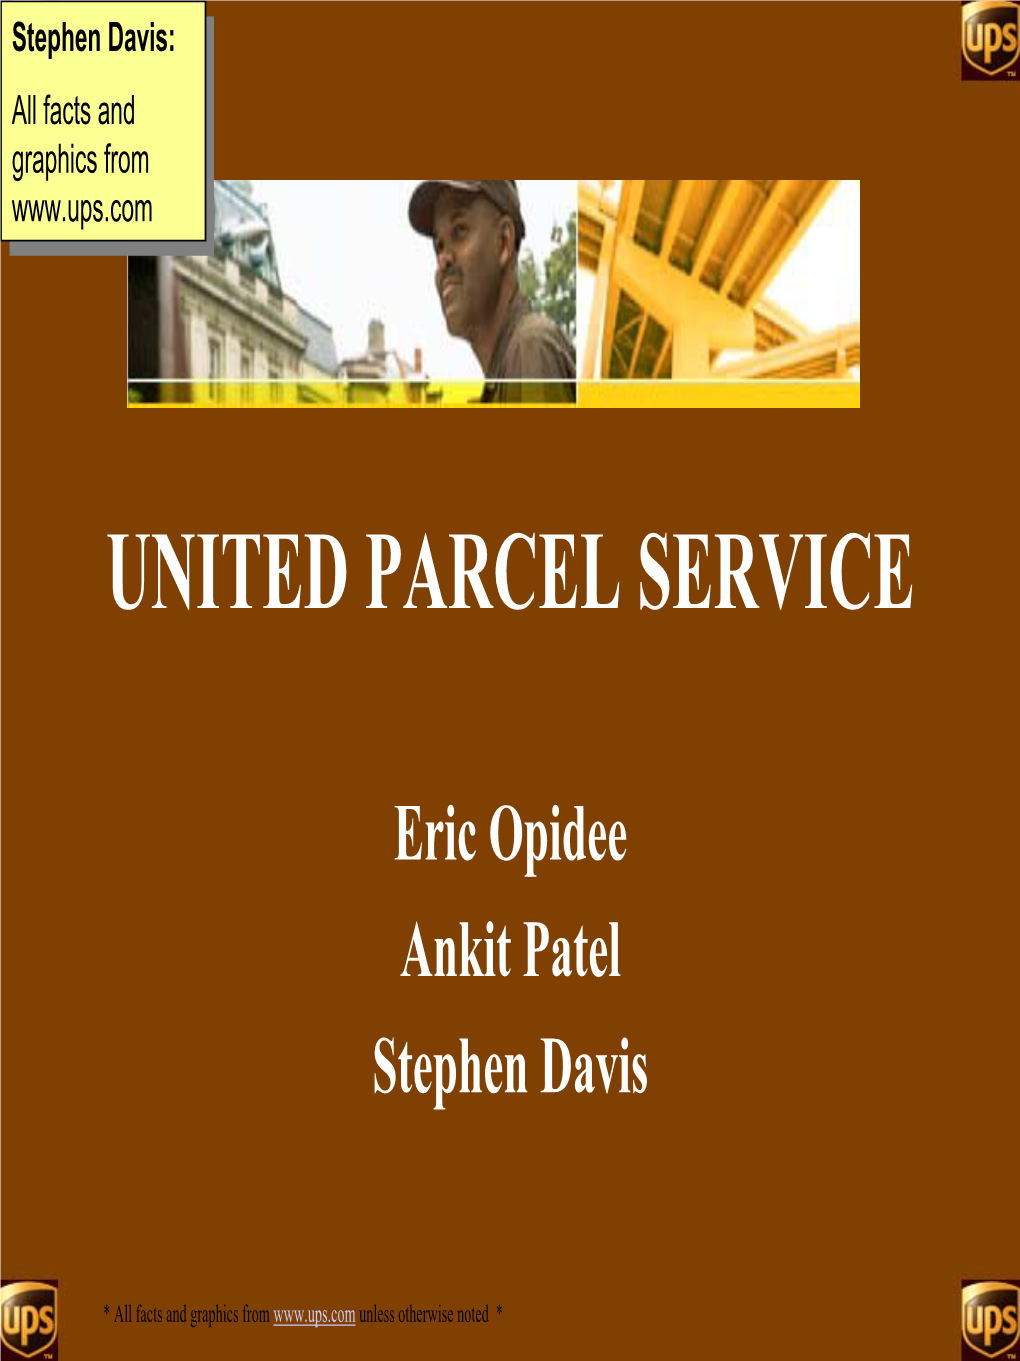 UNITED PARCEL SERVICE Central Problems/Solutions Consumer Confidence in UPS’S Delivery Times